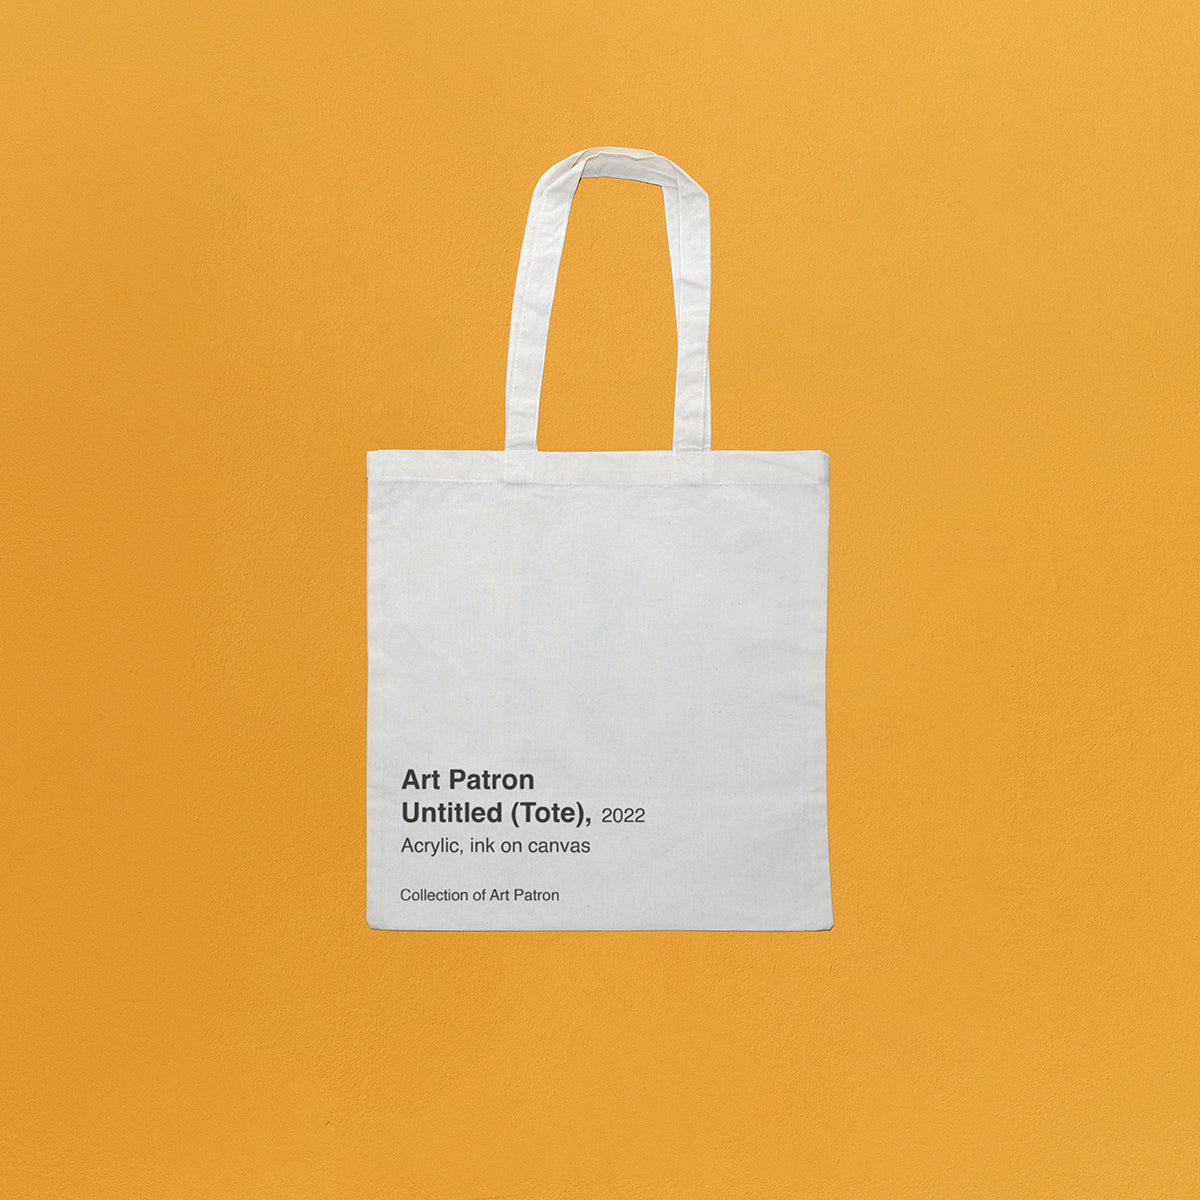 PREORDER - ART PATRON TITLE CARD TOTE